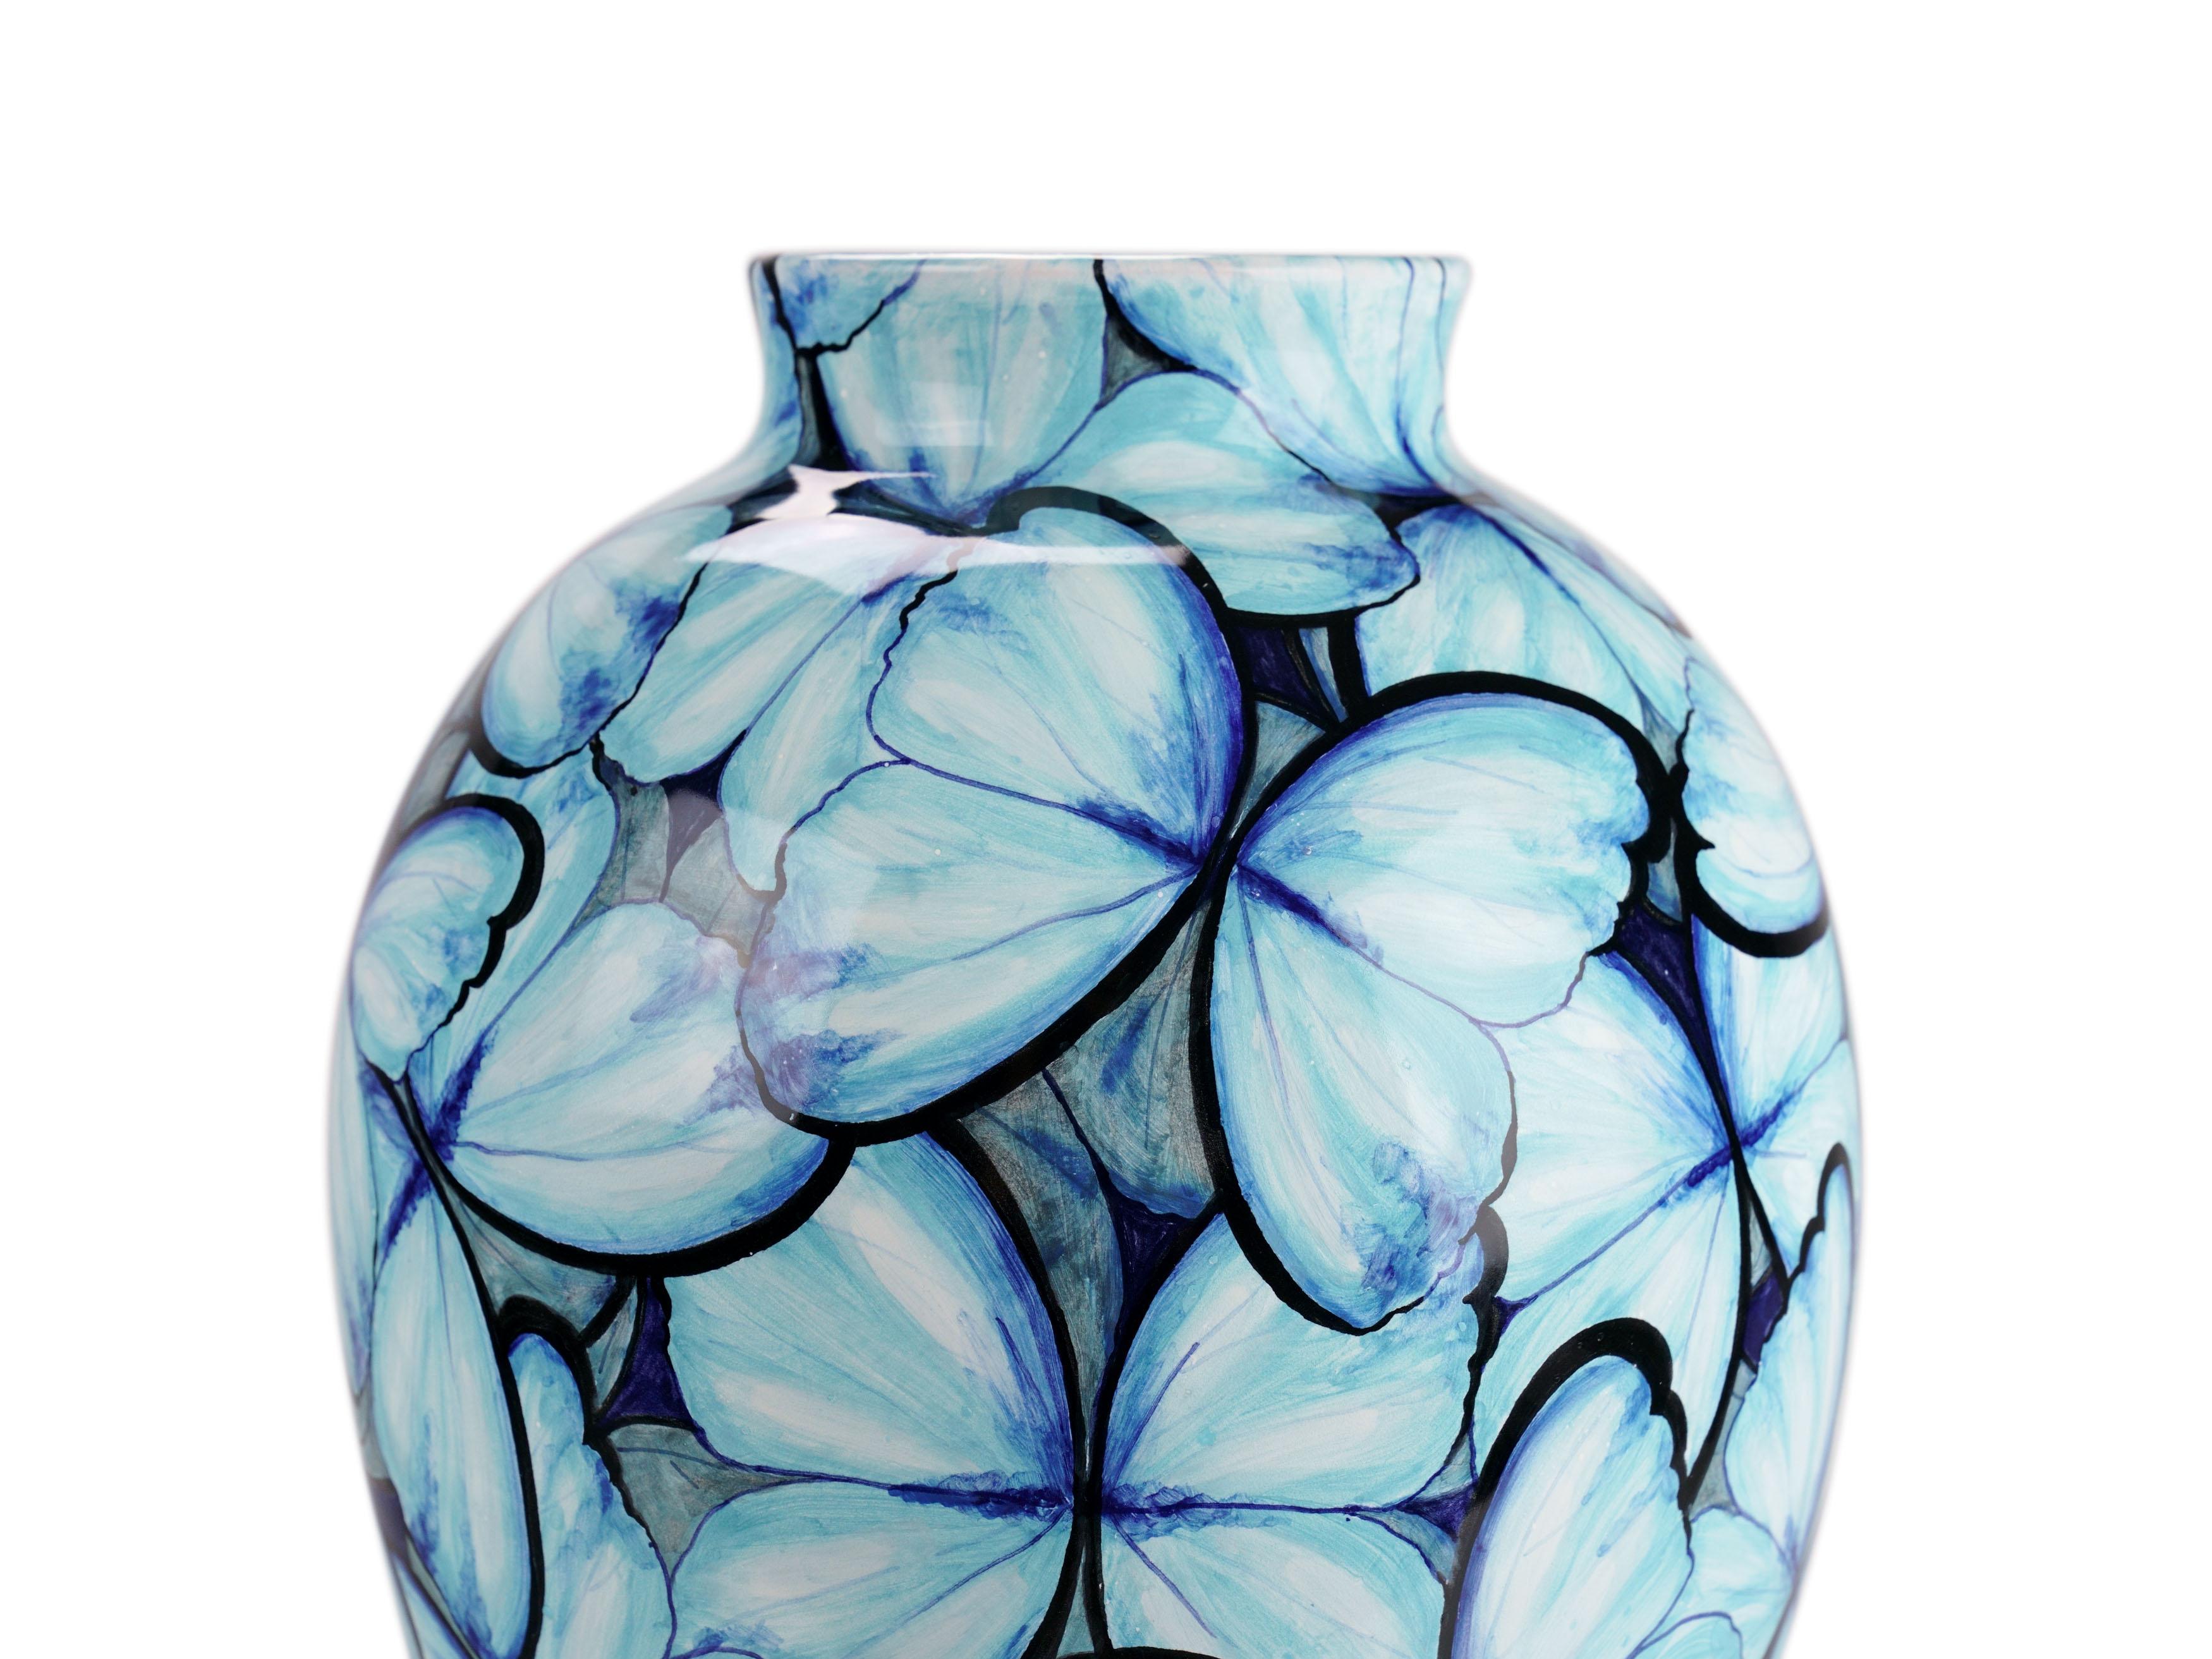 Blue Ceramic Majolica Vase Vessel Decorative Butterflies Hand Painted Italy For Sale 3